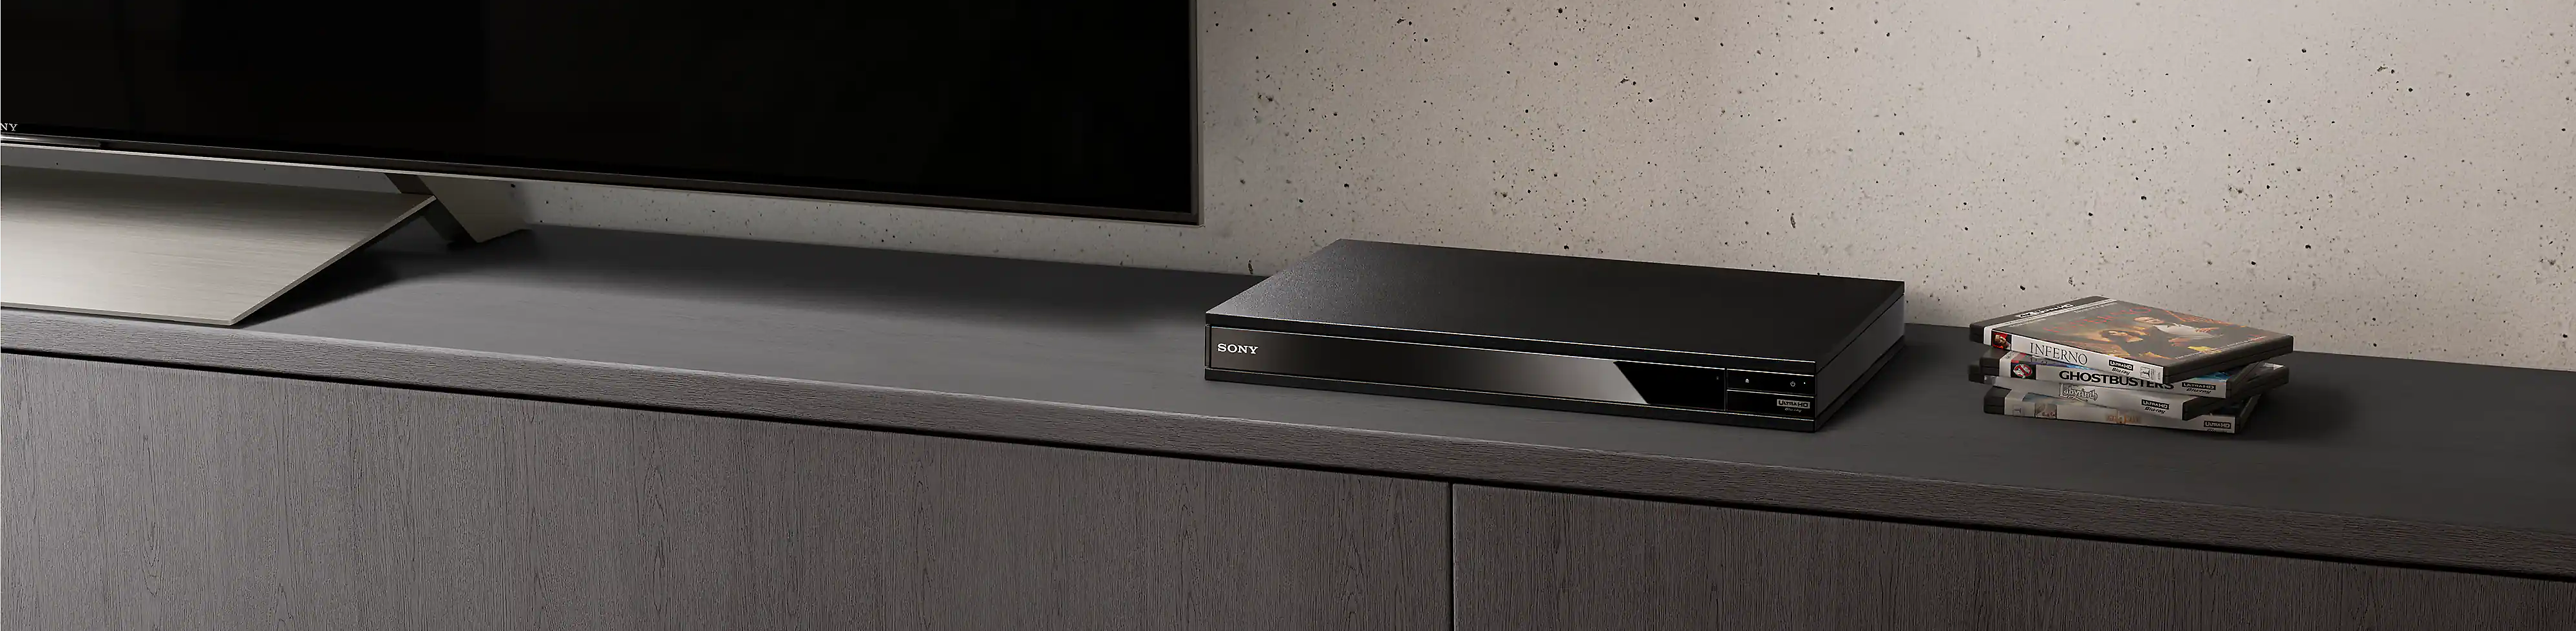 A black Blu-ray disc player is seen between a stack of blu-ray discs and a black TV.